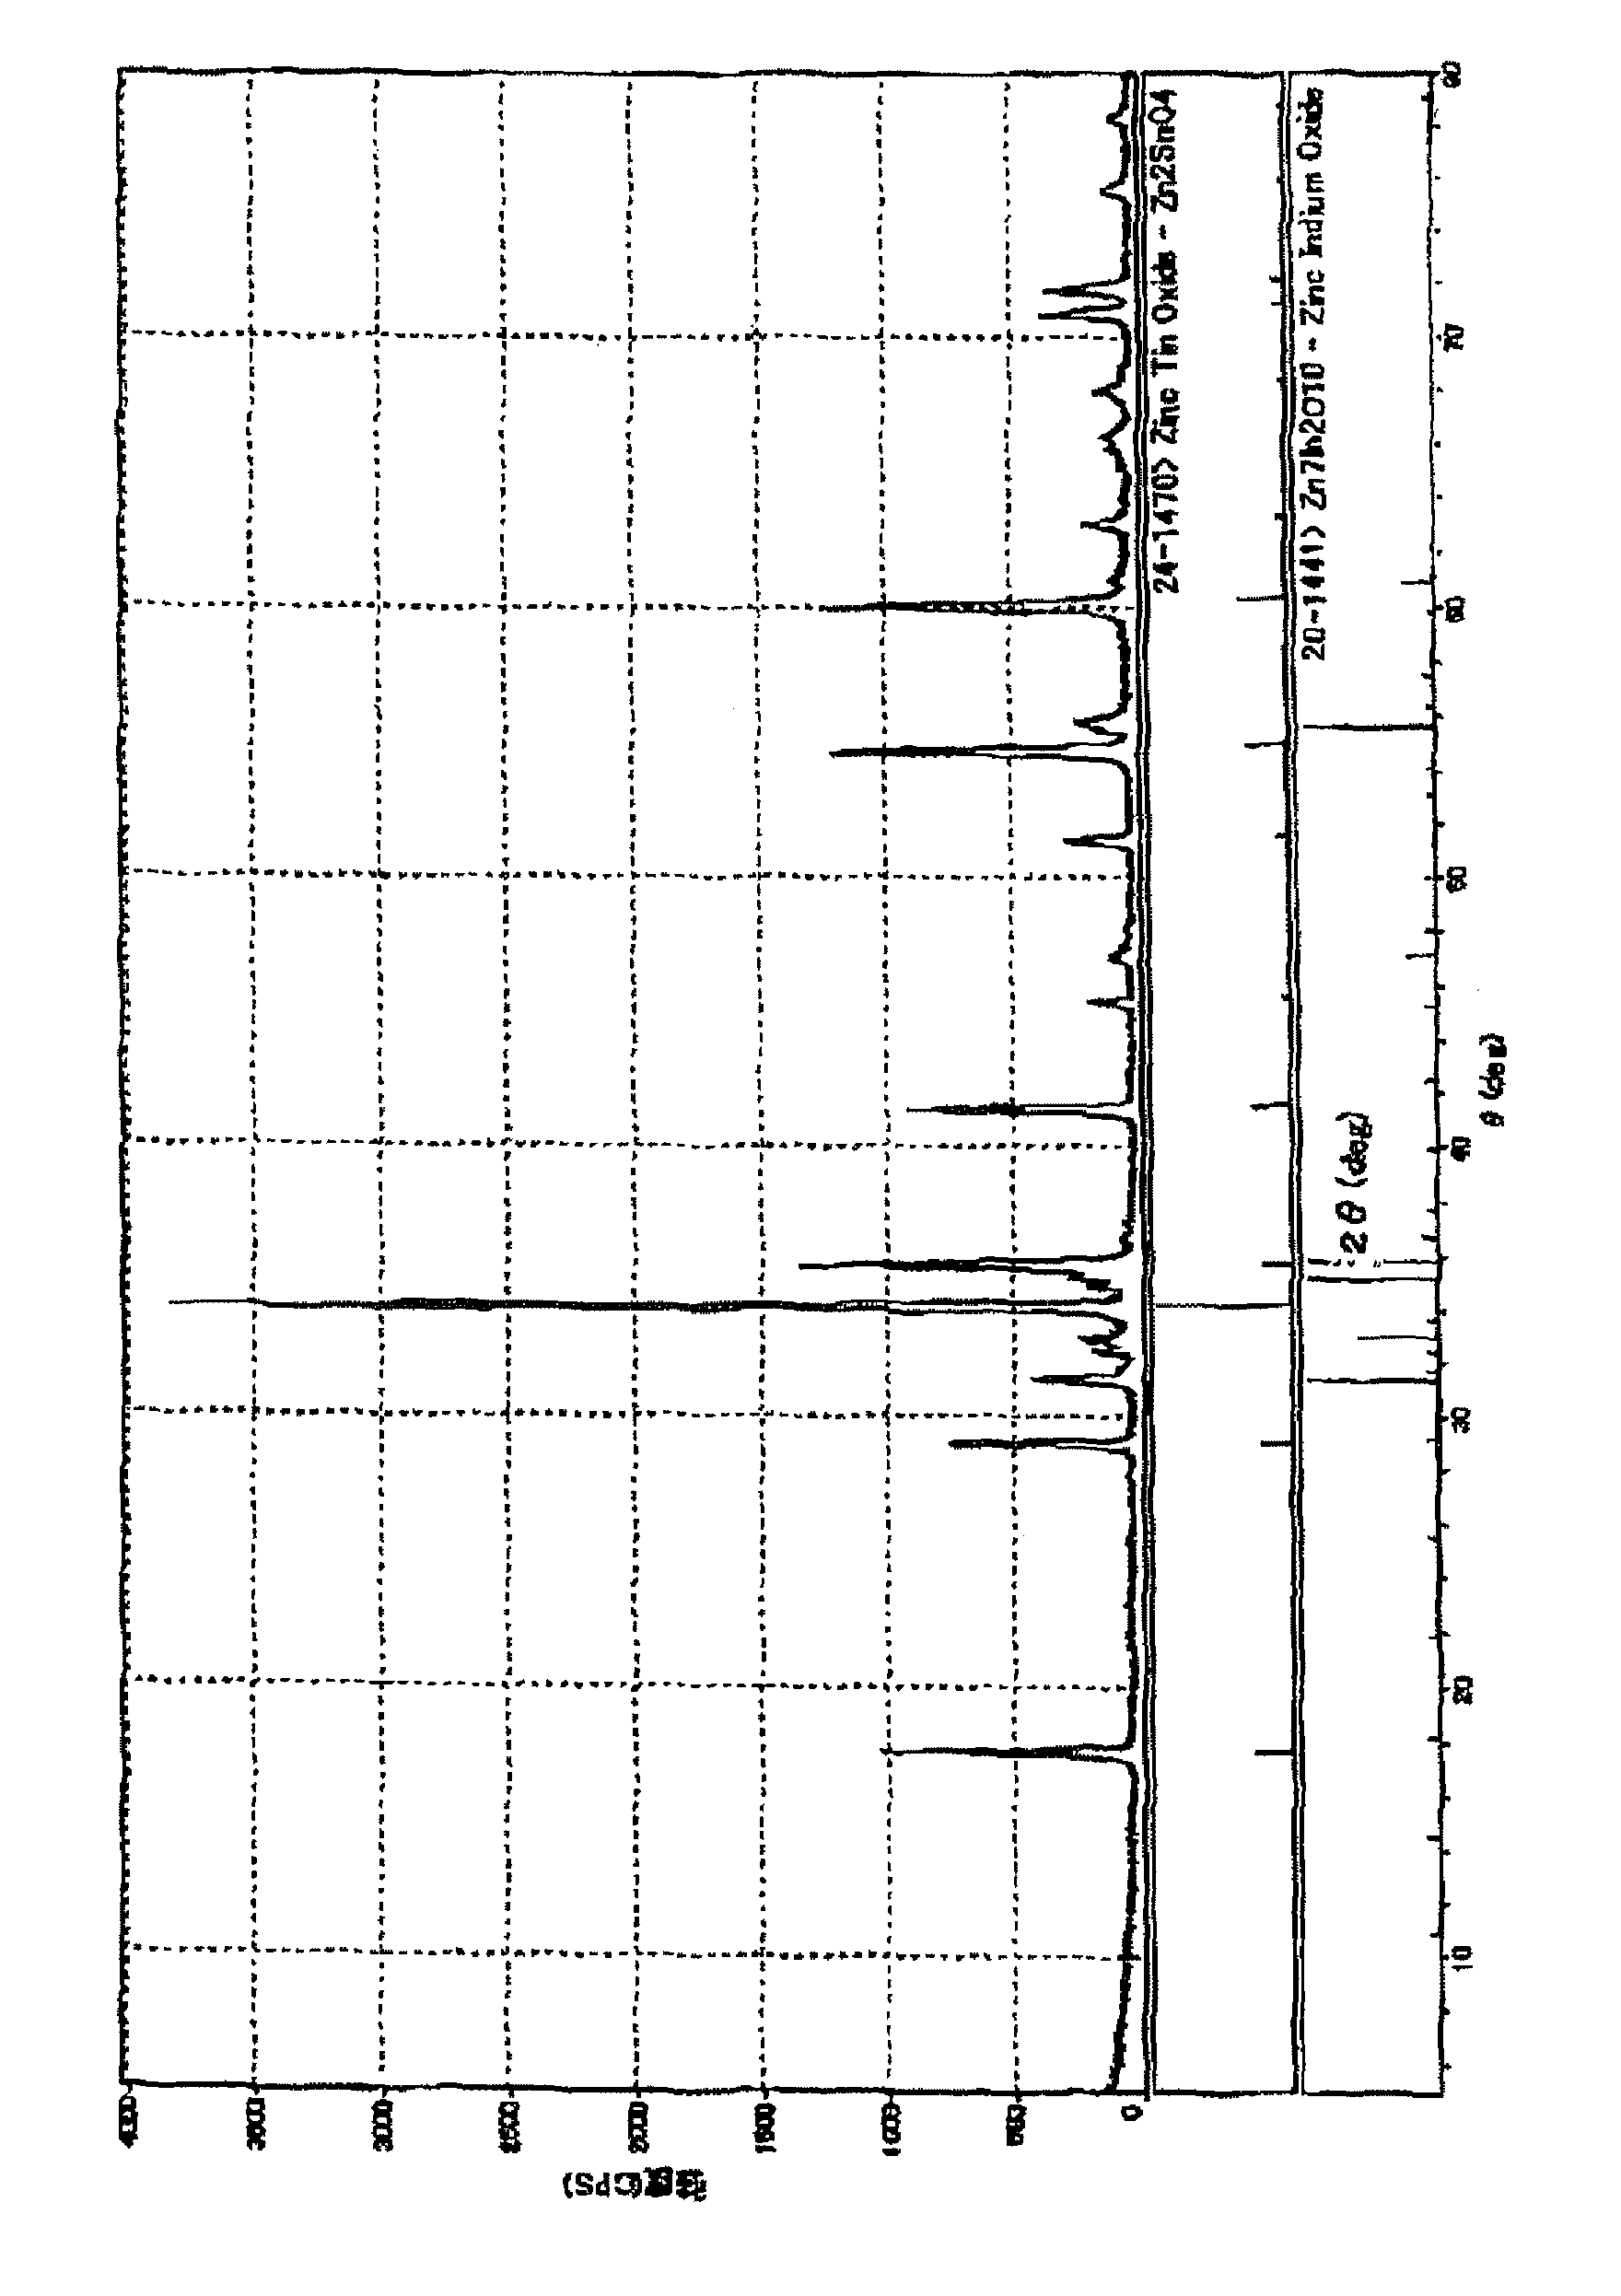 Sputtering target, transparent conductive film, and transparent electrode for touch panel